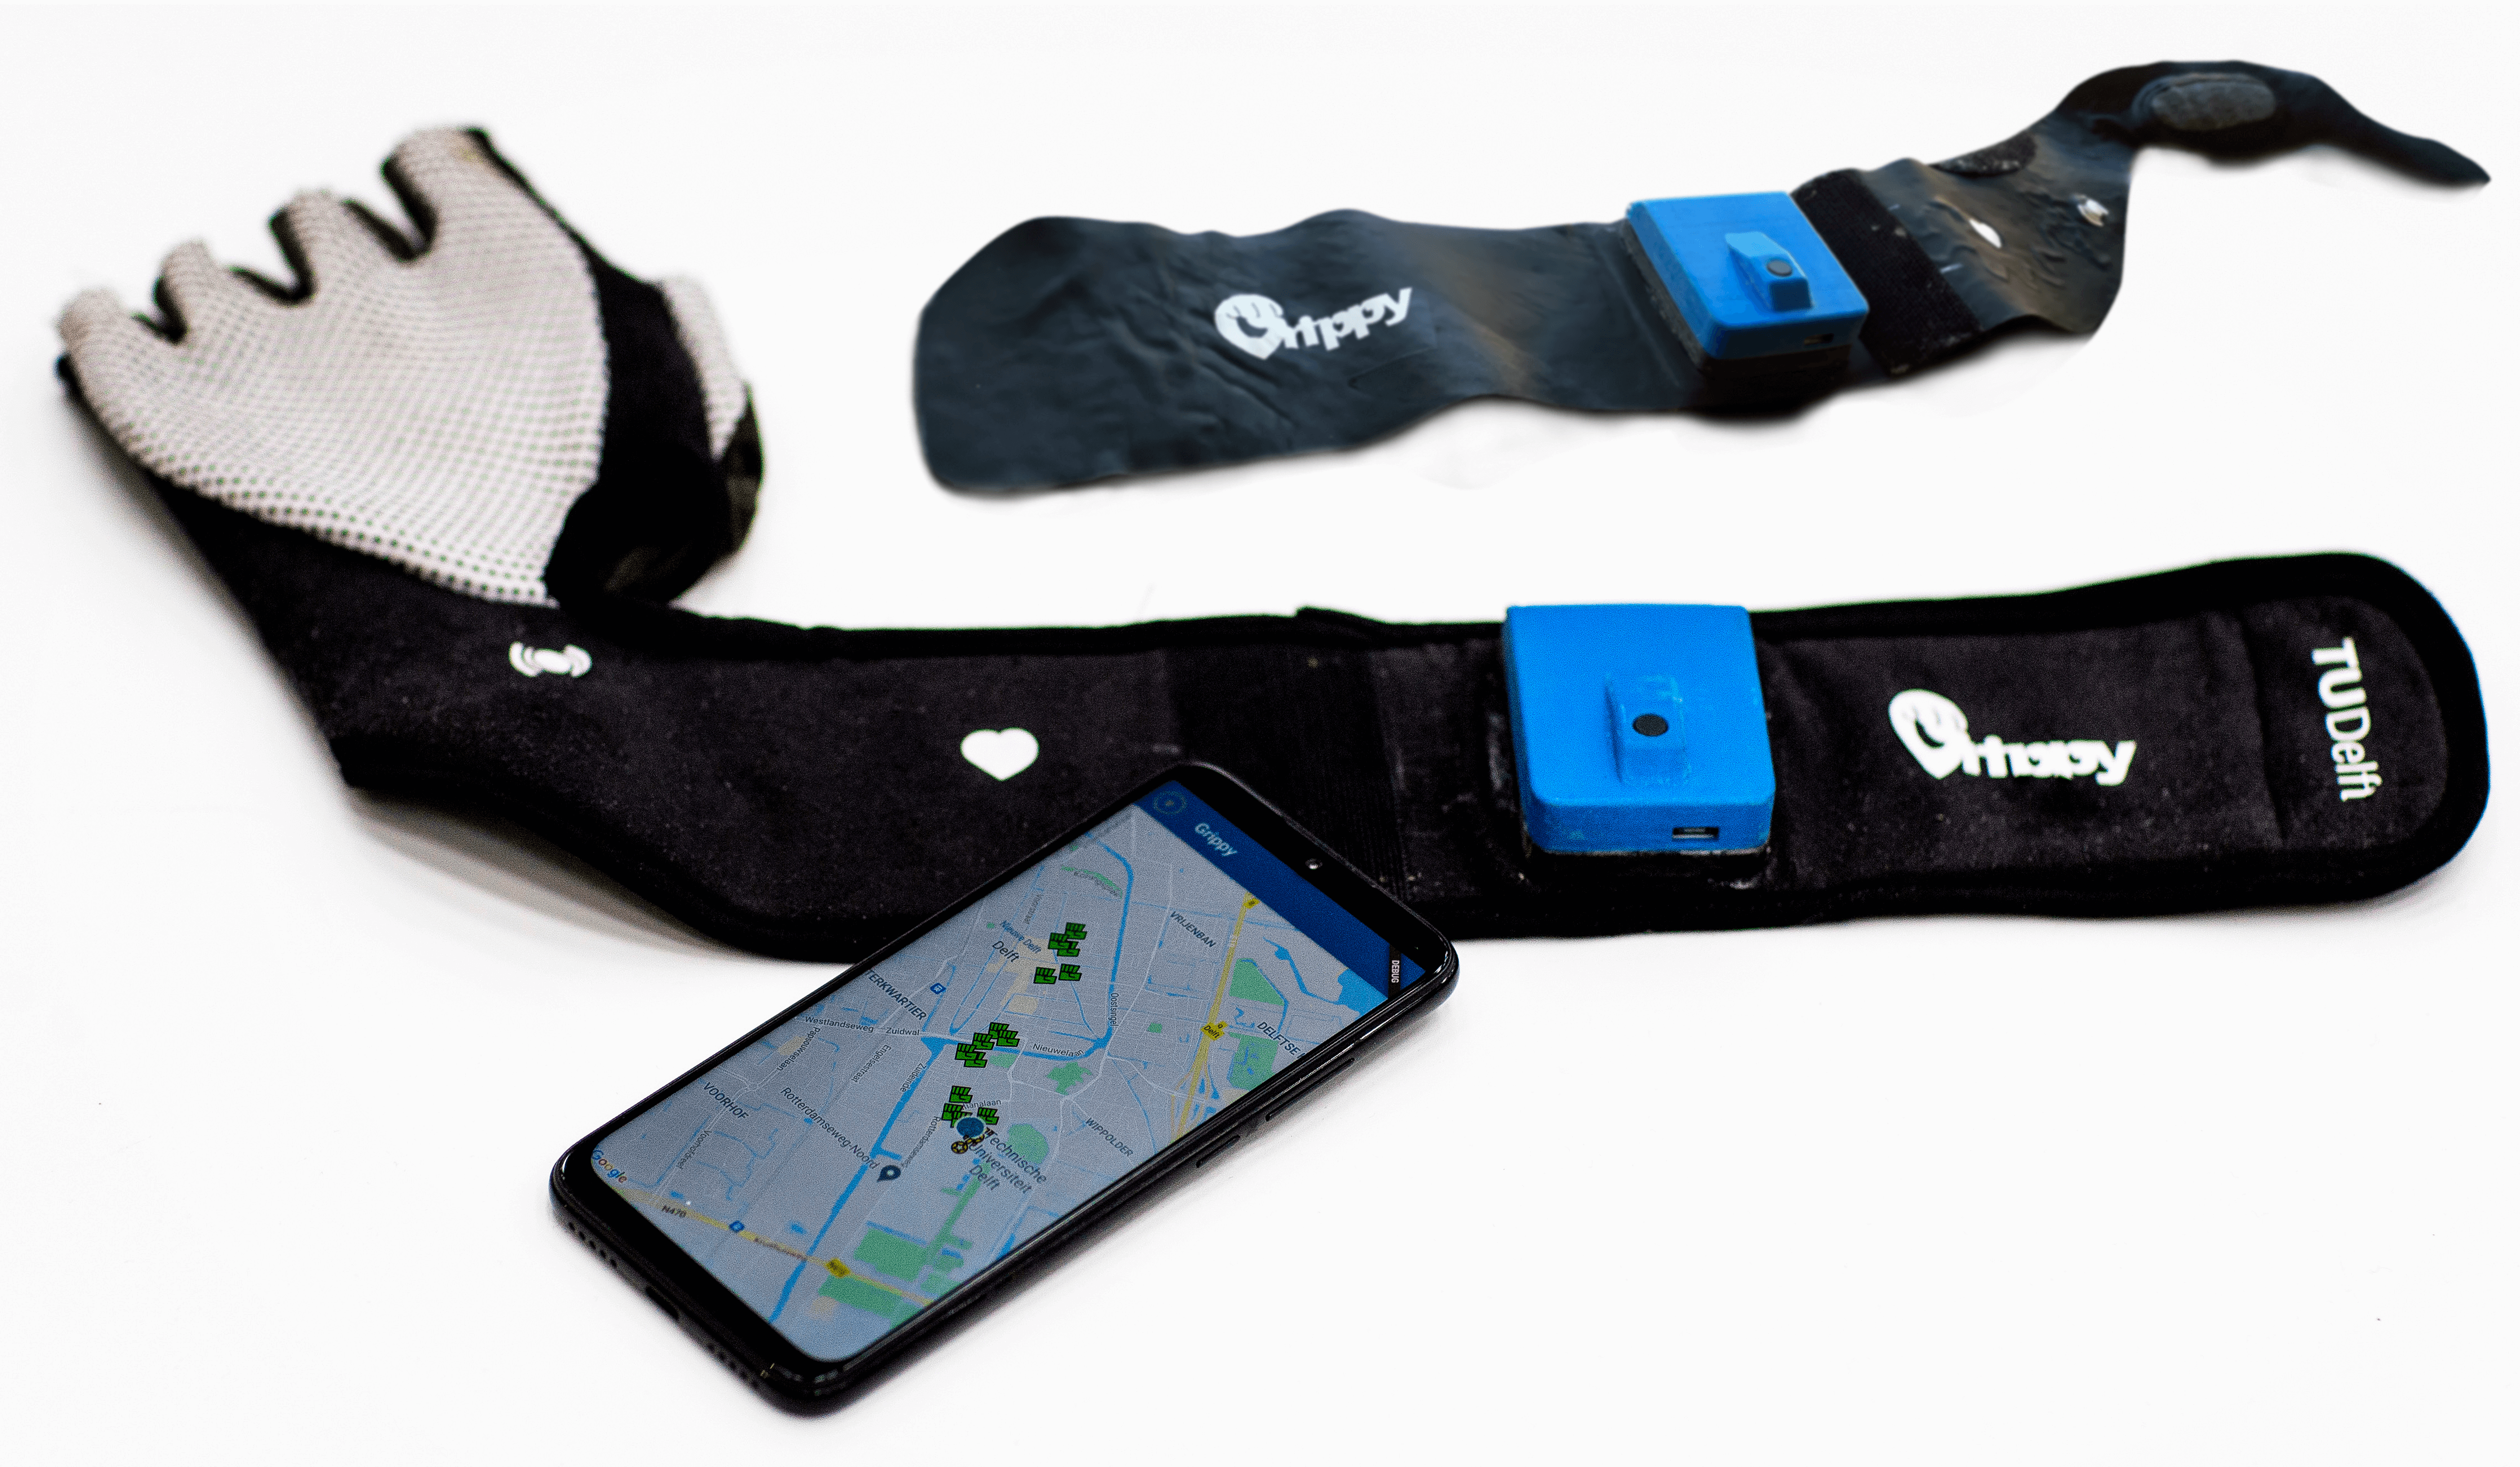 [Translate to English:] The complete set of the sensor glove, the receiver and the smartphone